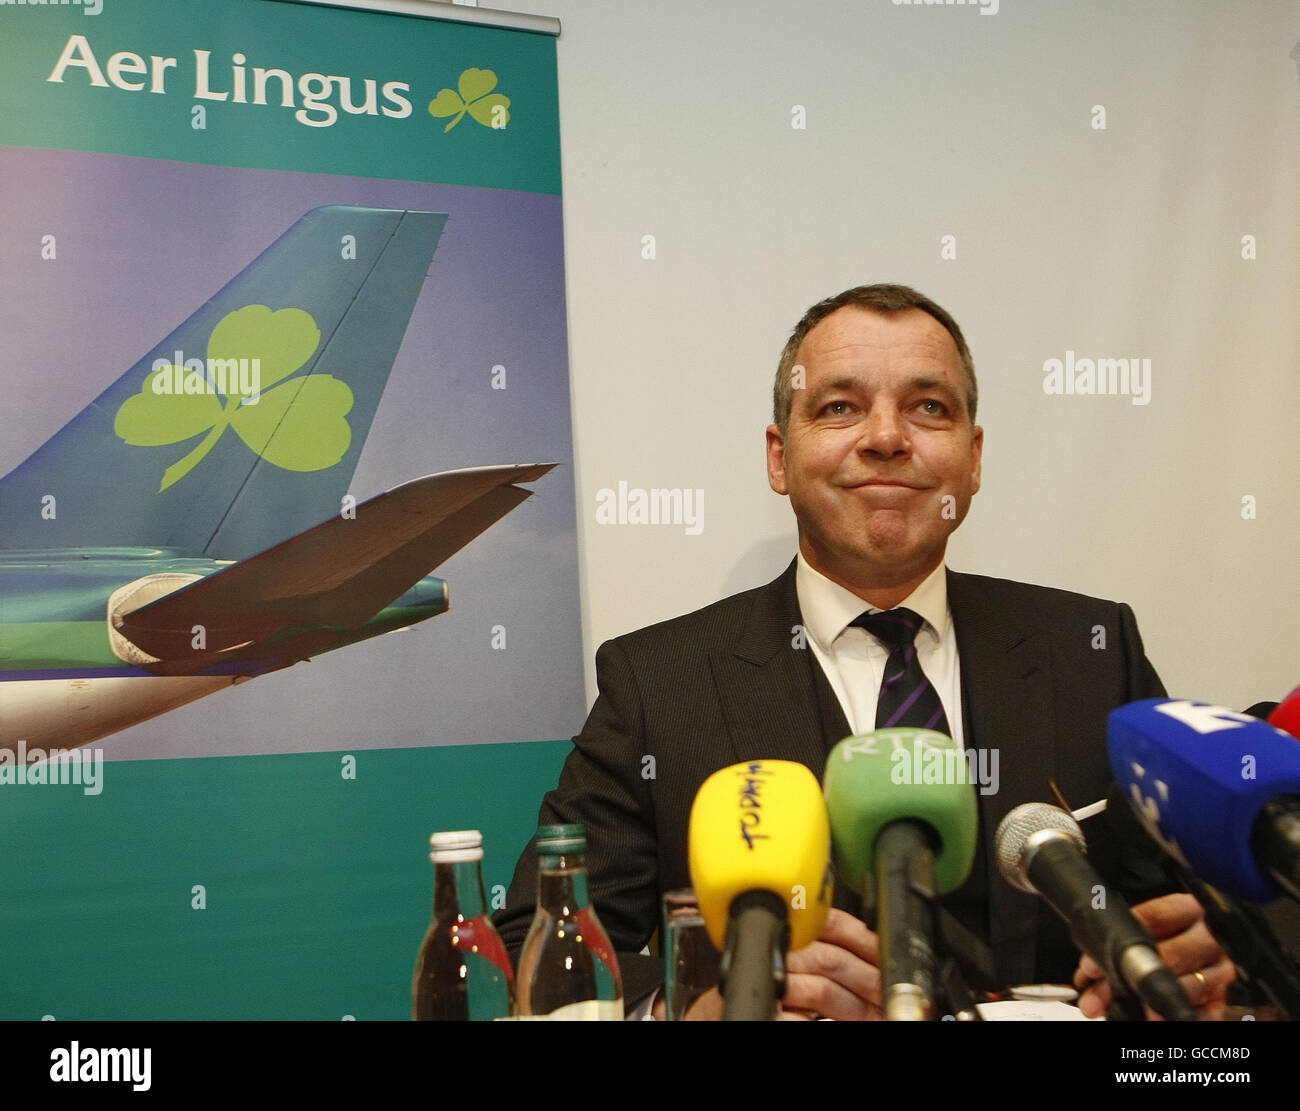 Aer Lingus chief executive Christoph Mueller at a press conference in Dublin today. Stock Photo